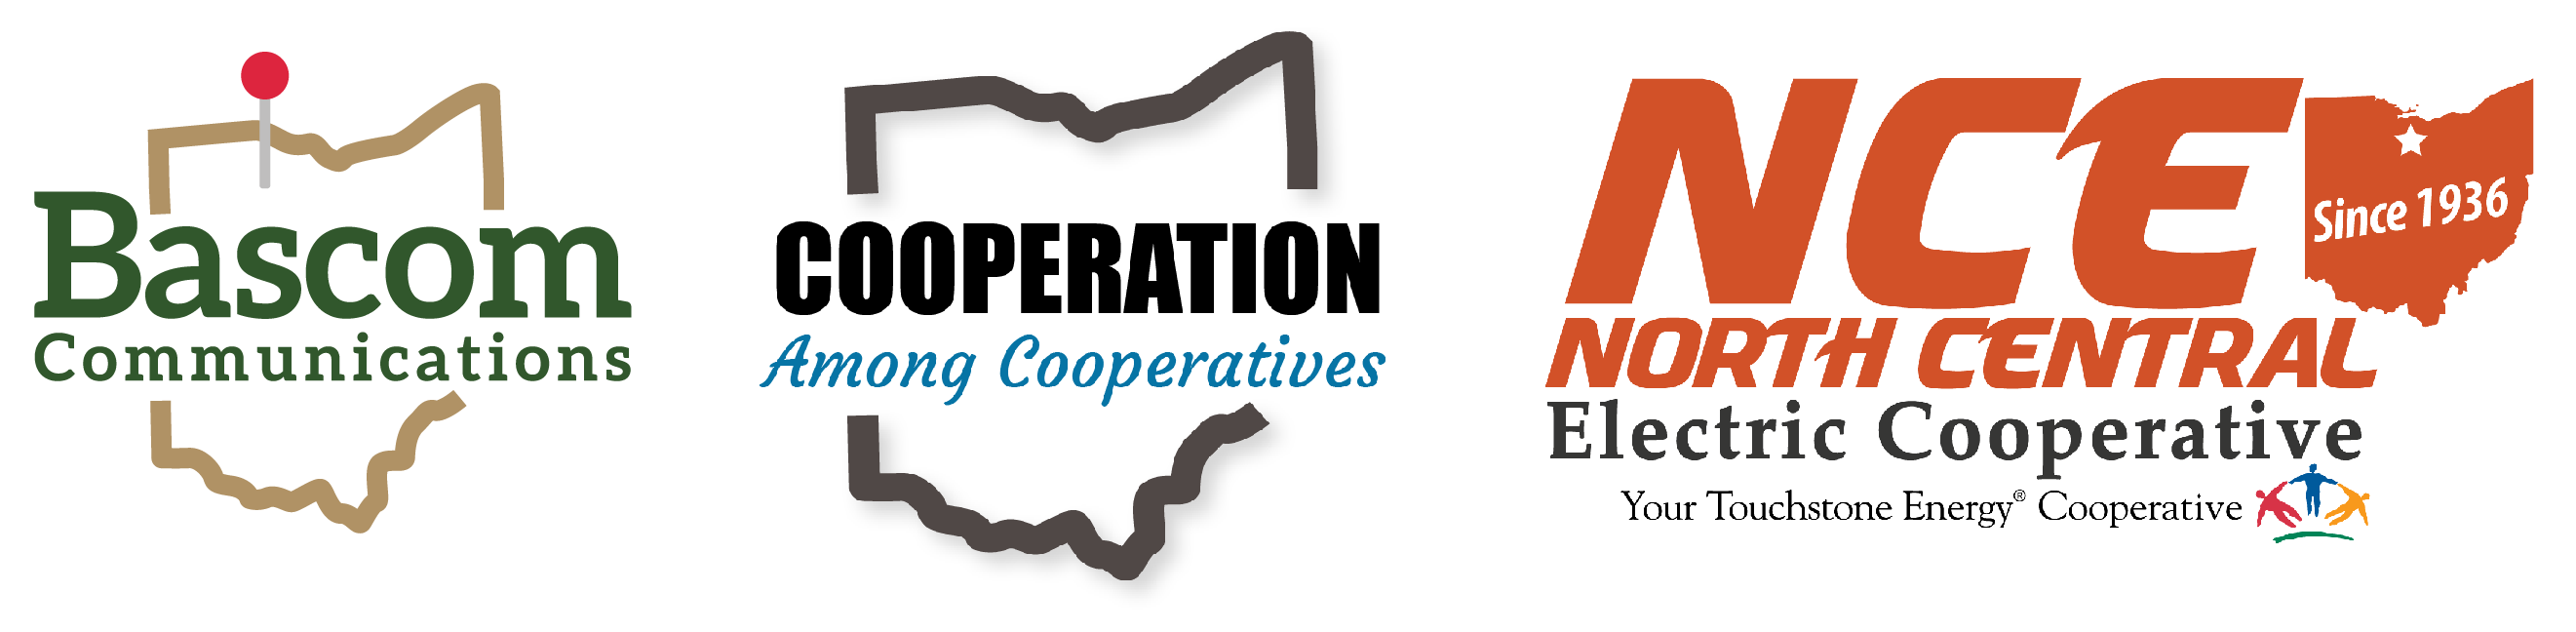 Bascom, North Central Electric, and Cooperation Logos